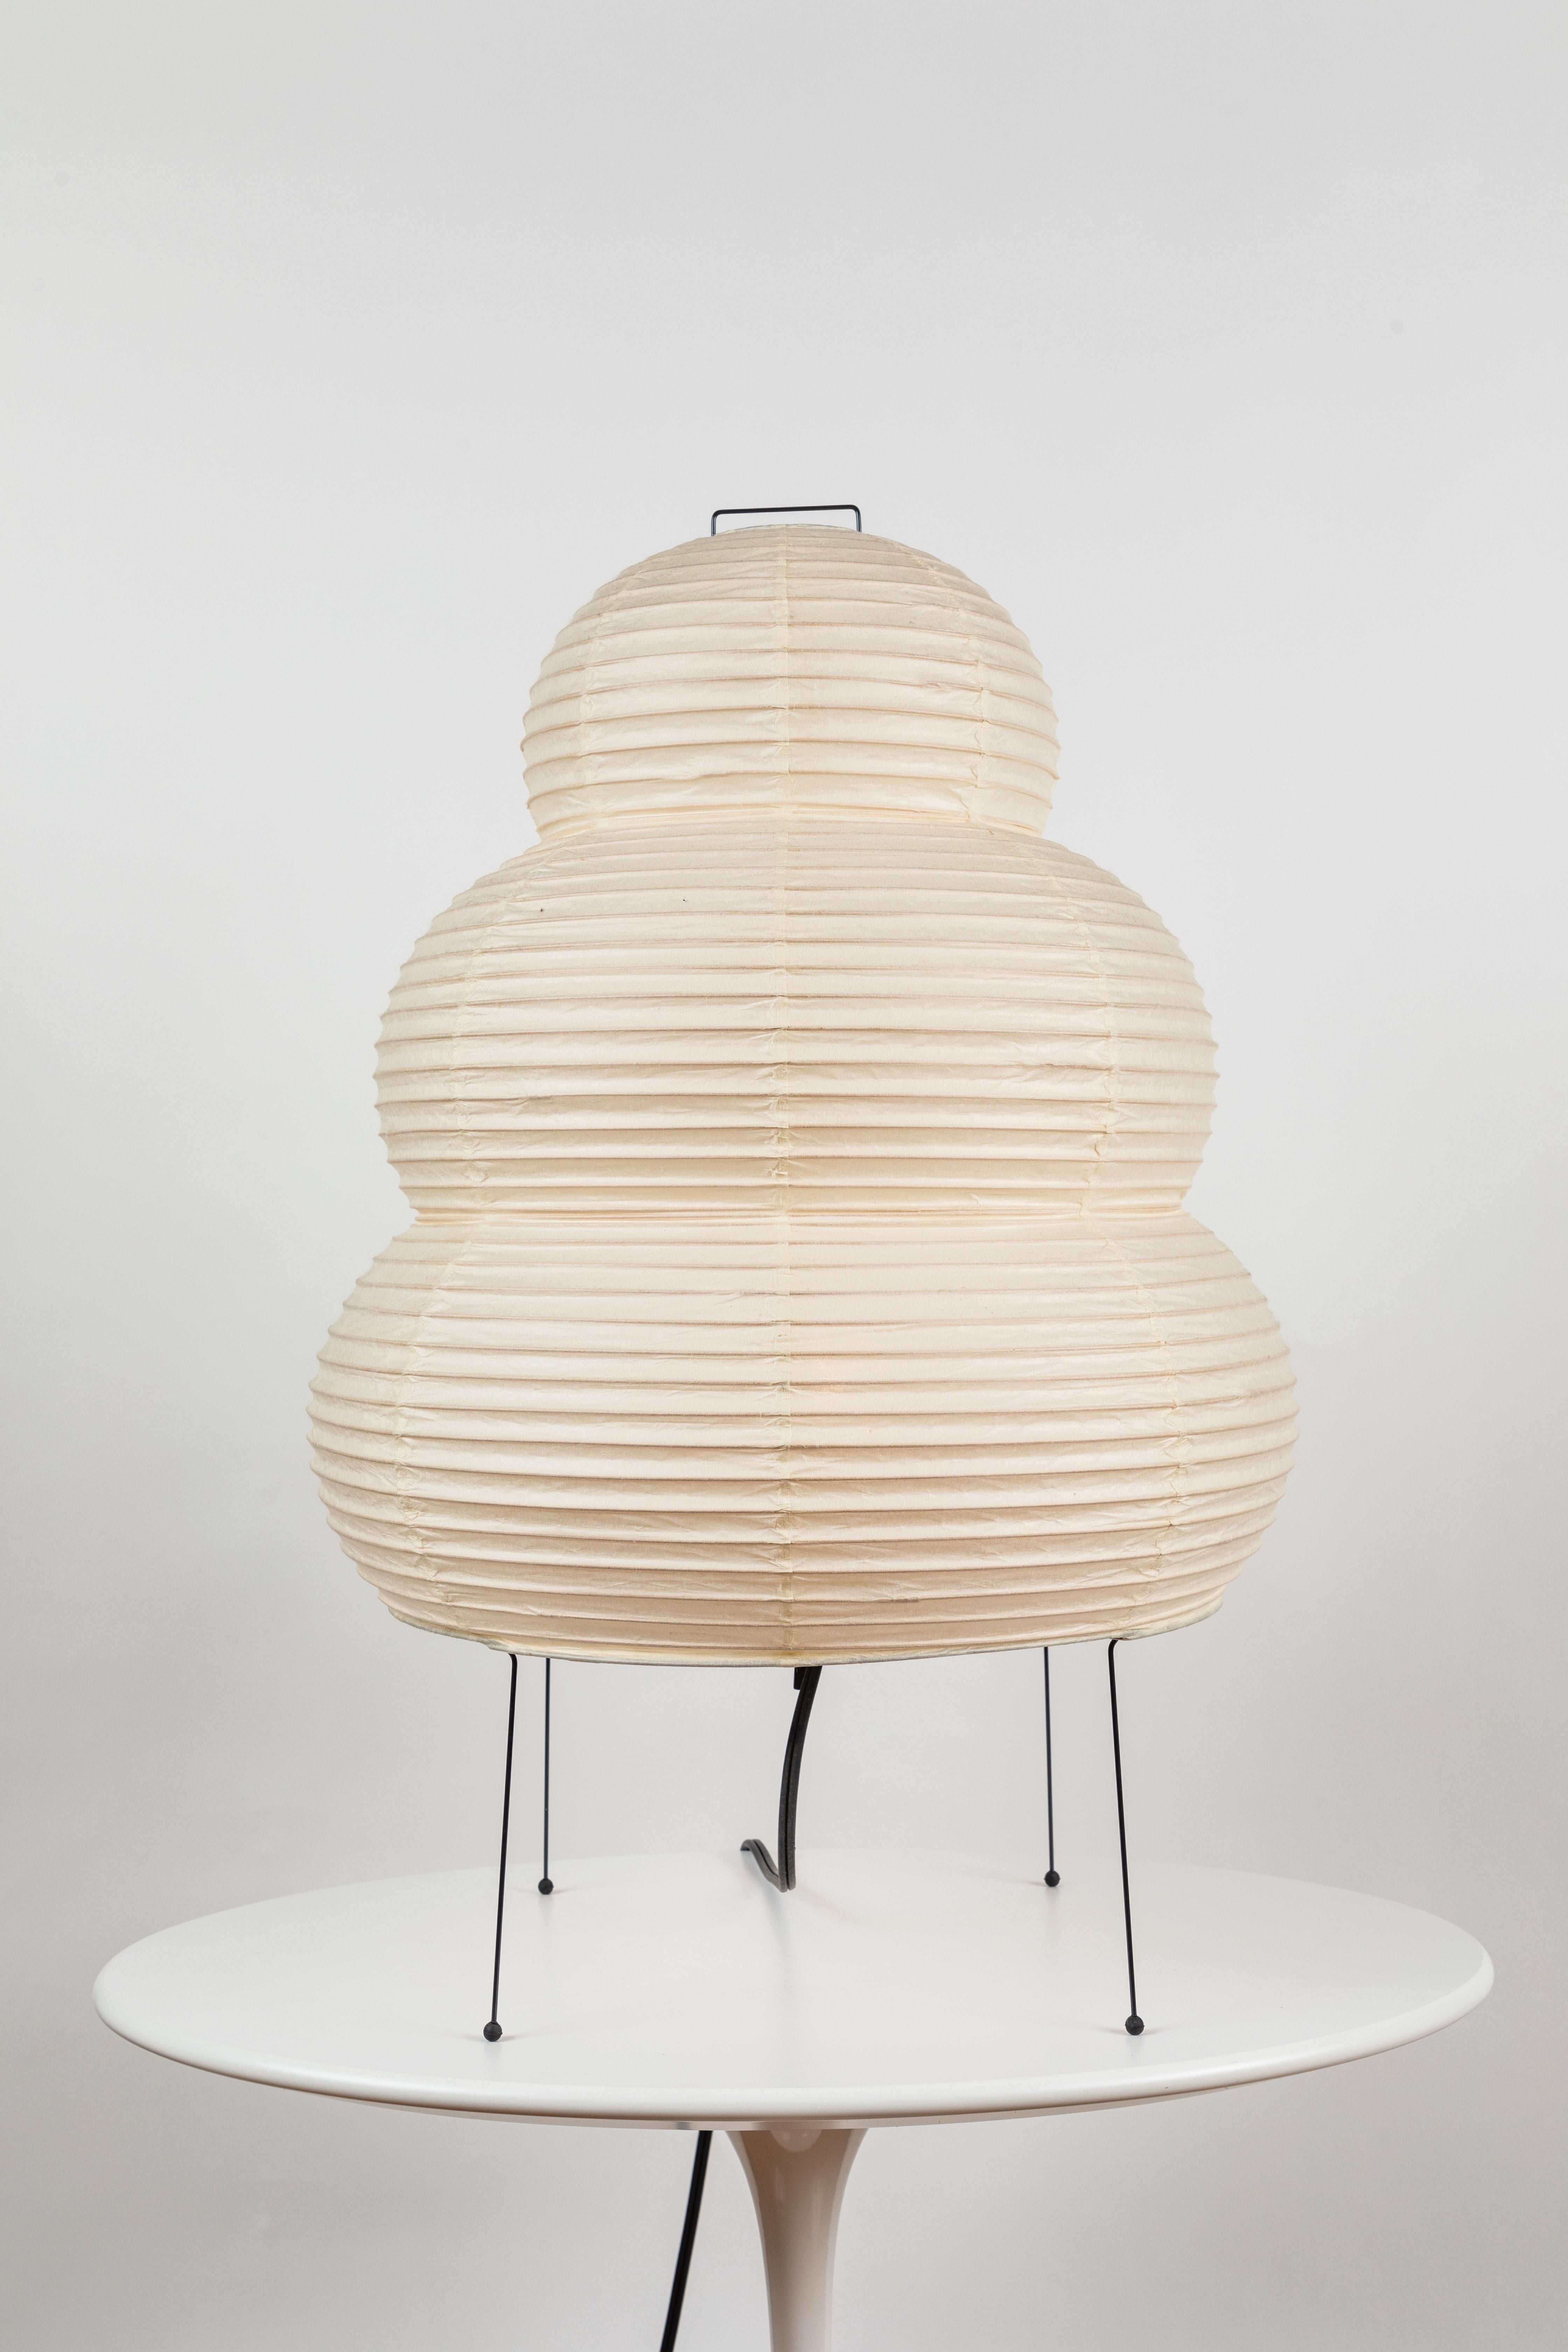 Akari model 24N light sculpture by Isamu Noguchi. The shade is made from handmade washi paper and bamboo ribs with Noguchi Akari manufacturer's stamp. Akari light sculptures by Isamu Noguchi are considered icons of 1950s modern design. Designed by